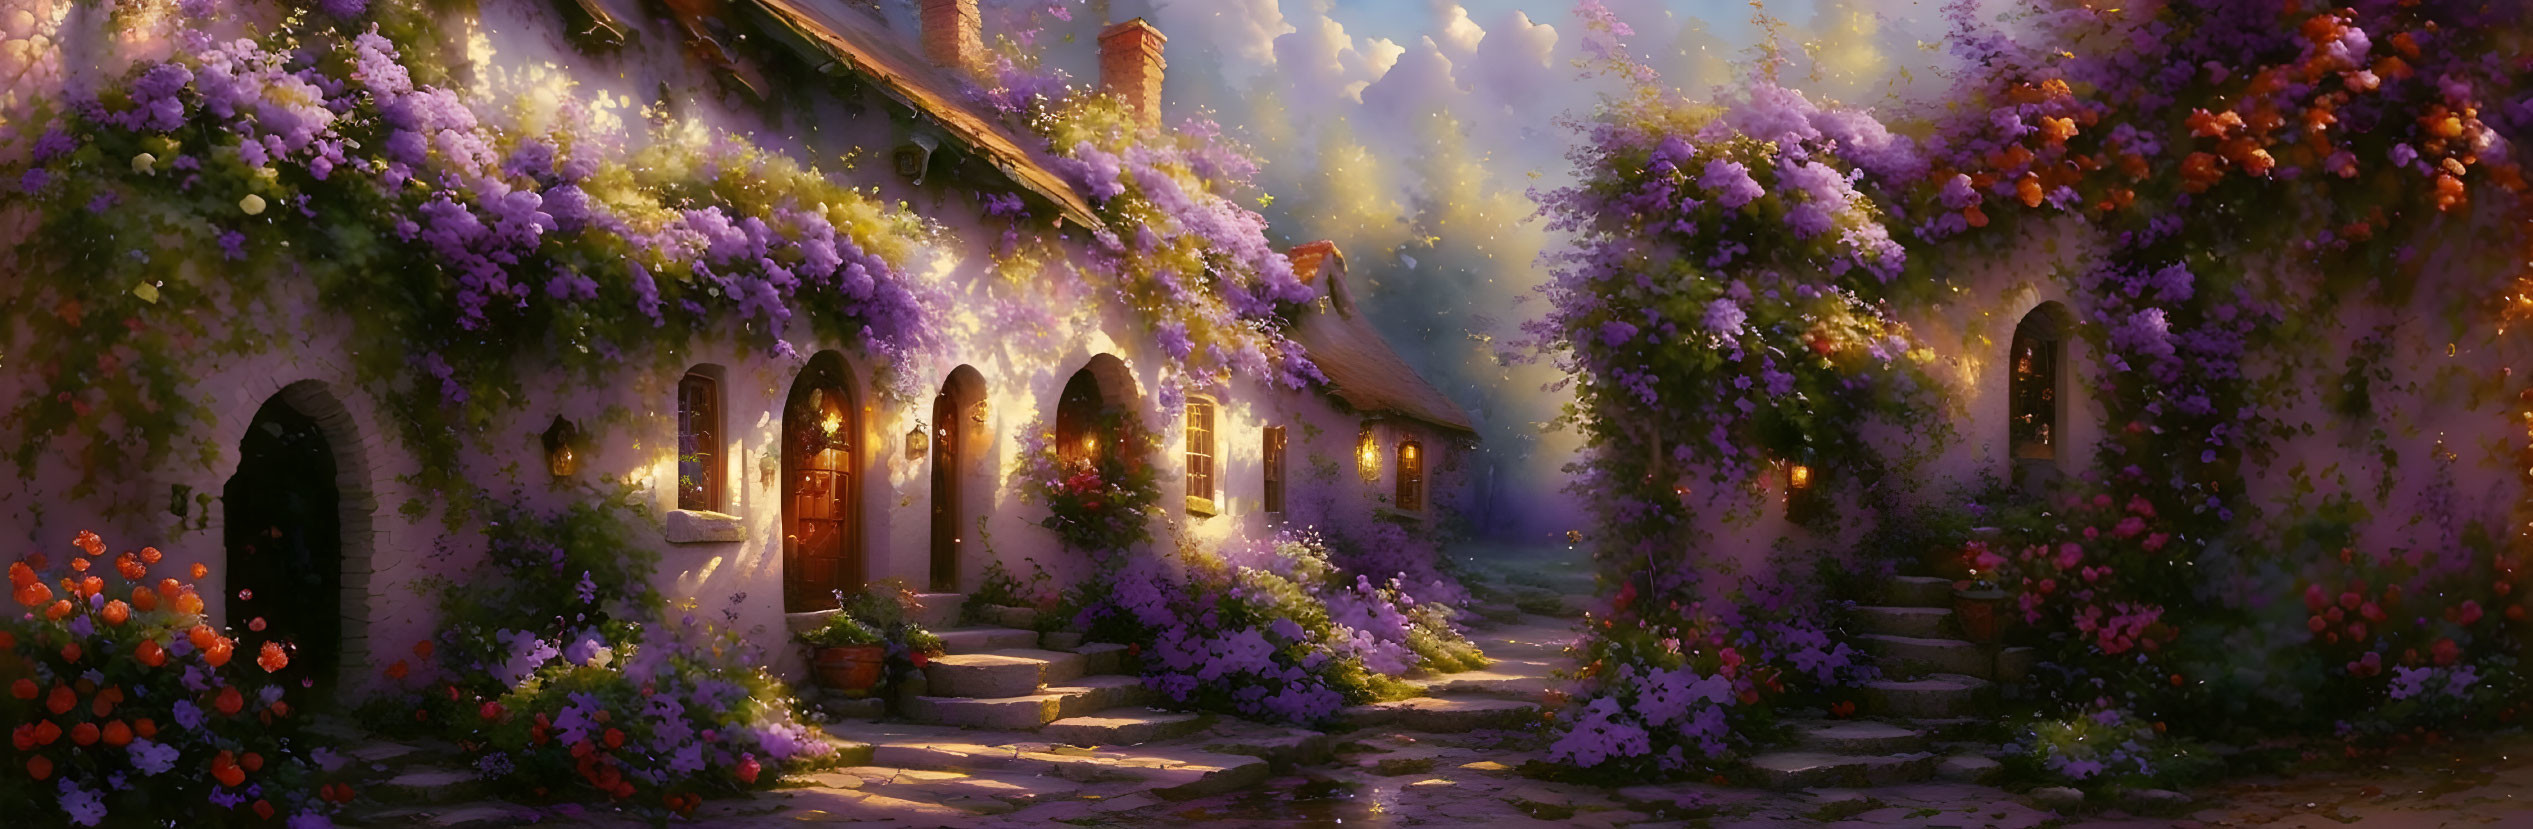 Tranquil cobblestone pathway with glowing cottages and purple blooms